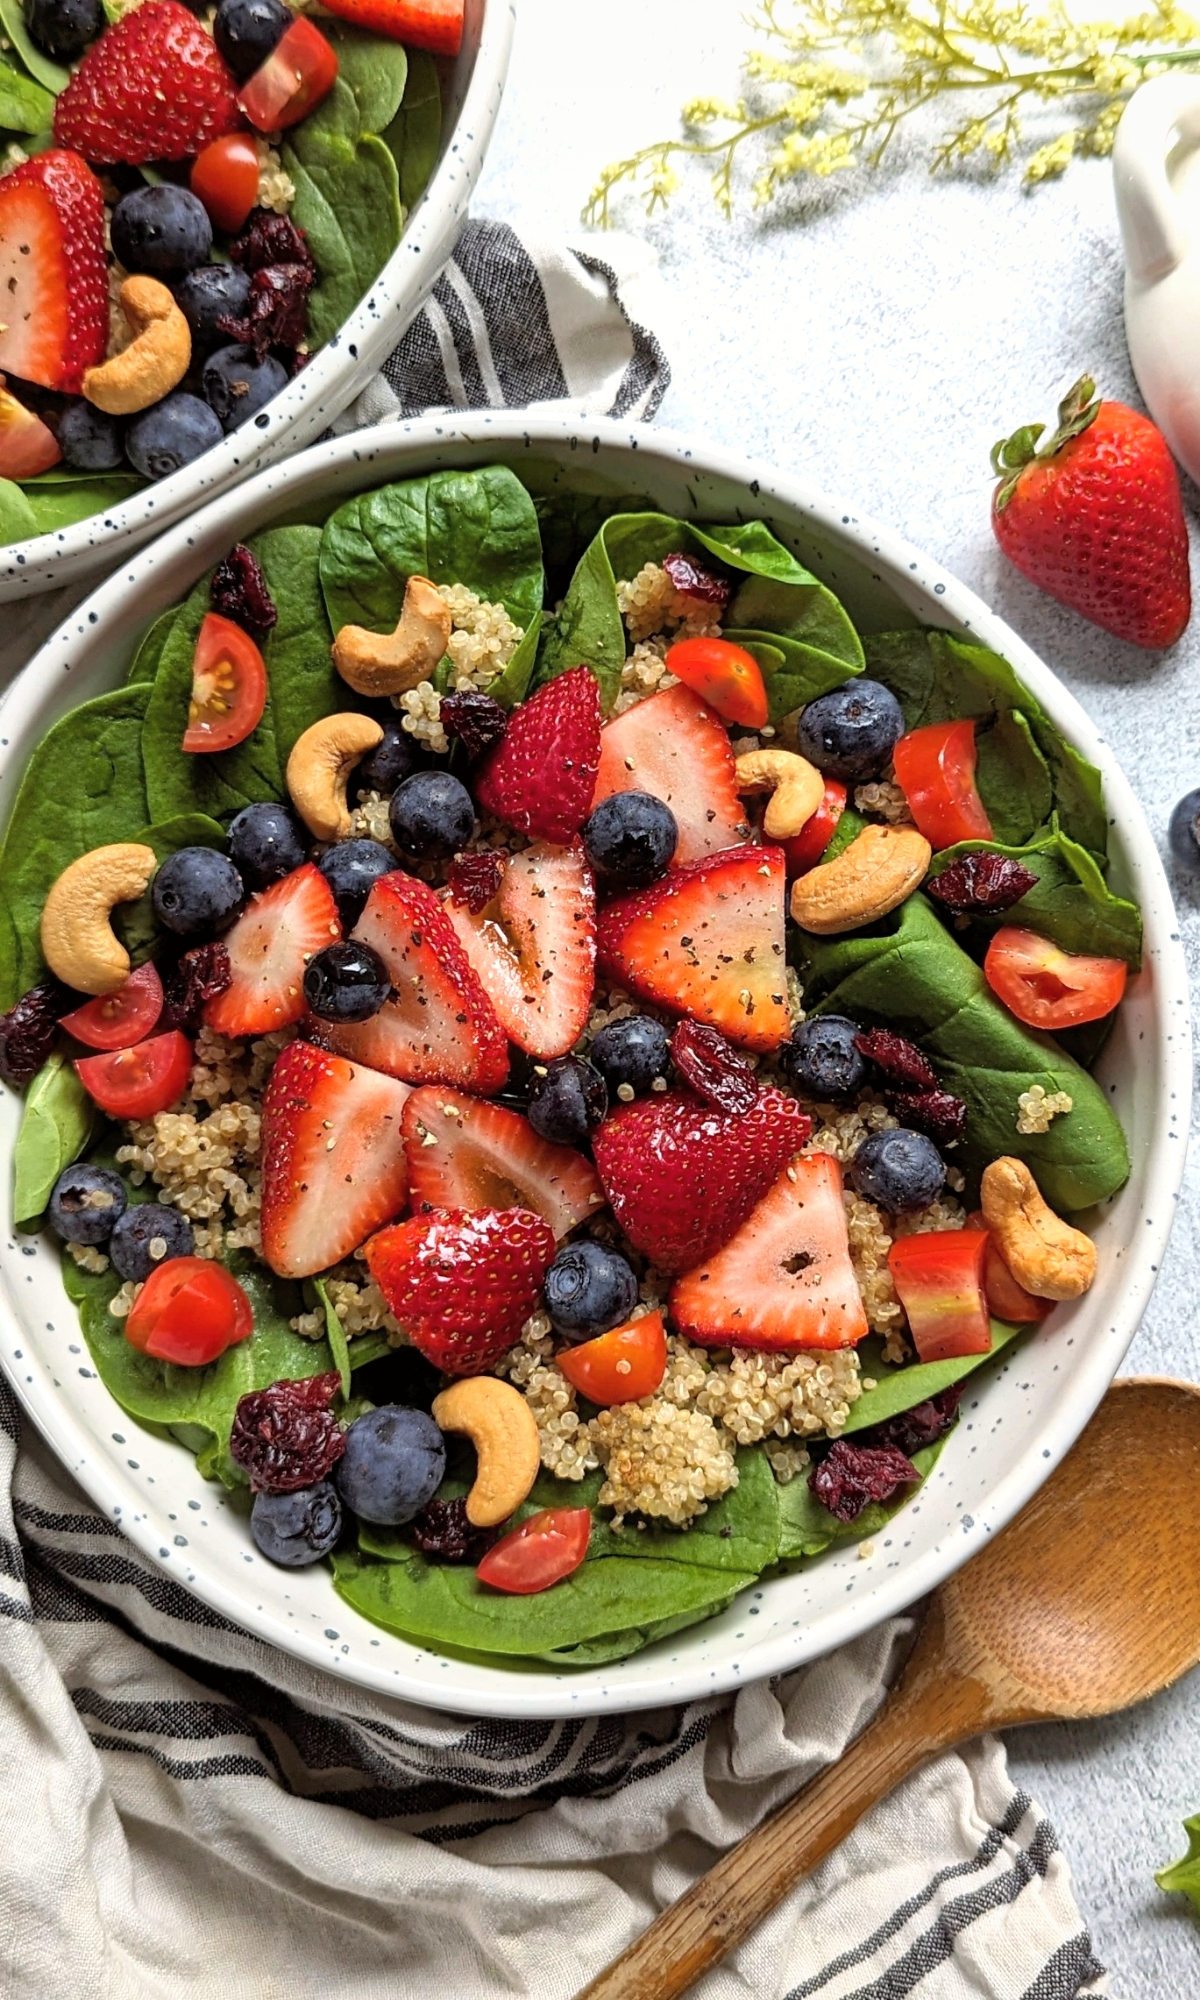 summer strawberry salad recipe with spinach and blueberry salad with nuts and a honey lemon vinaigrette dressing vegetarian summer side salads for guests gluten free side salads